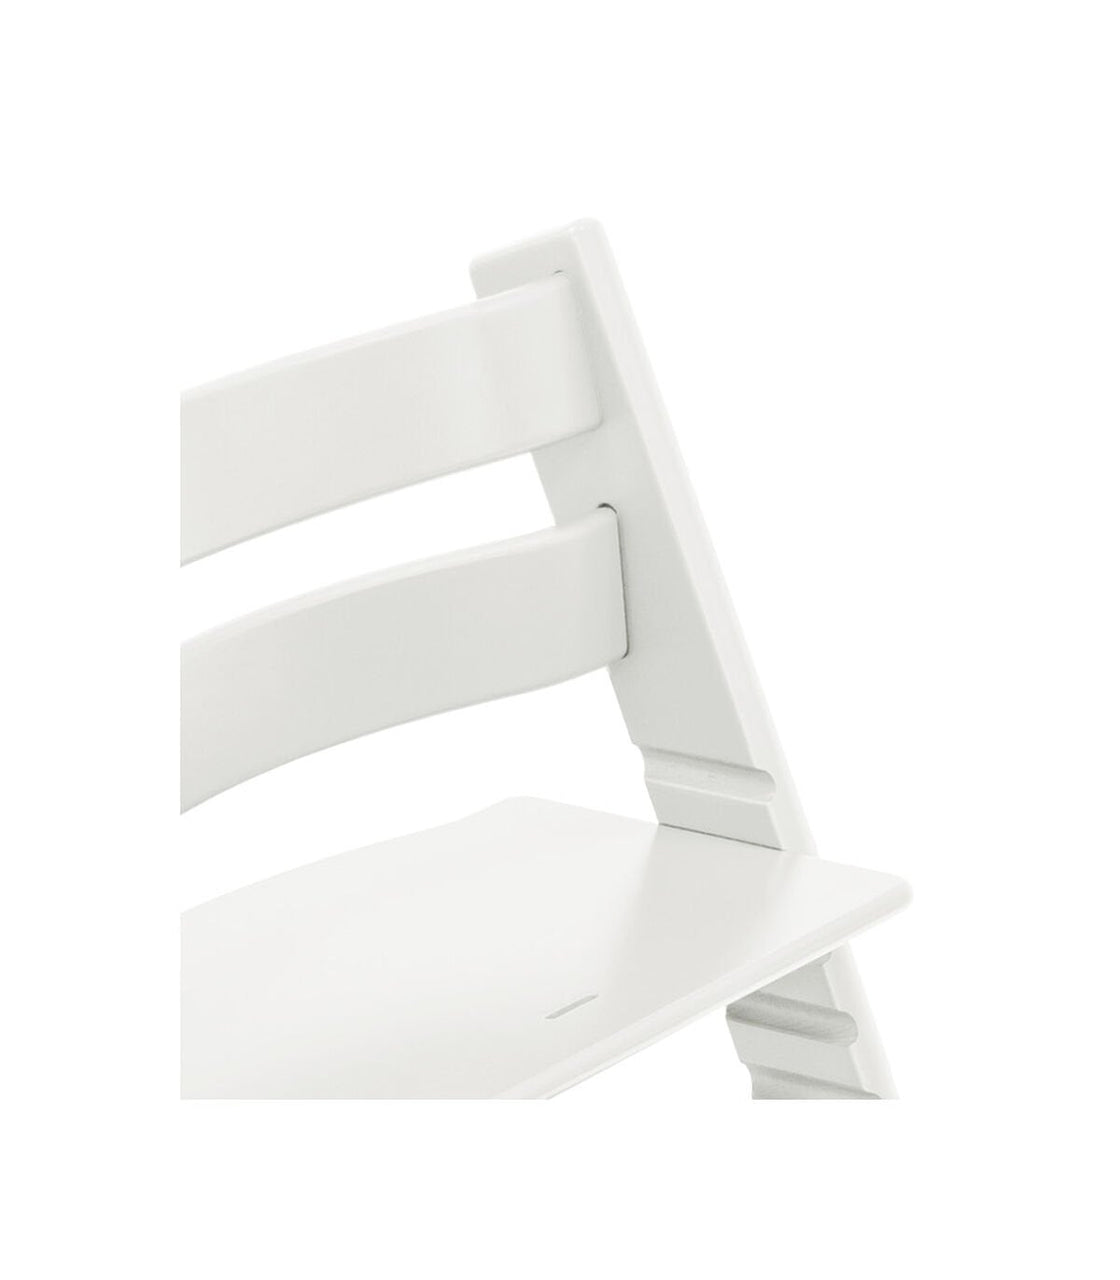 Stokke Tripp Trapp Chair from Stokke, White - Adjustable, Convertible Chair  for Toddlers, Children & Adults - Convenient, Comfortable & Ergonomic 